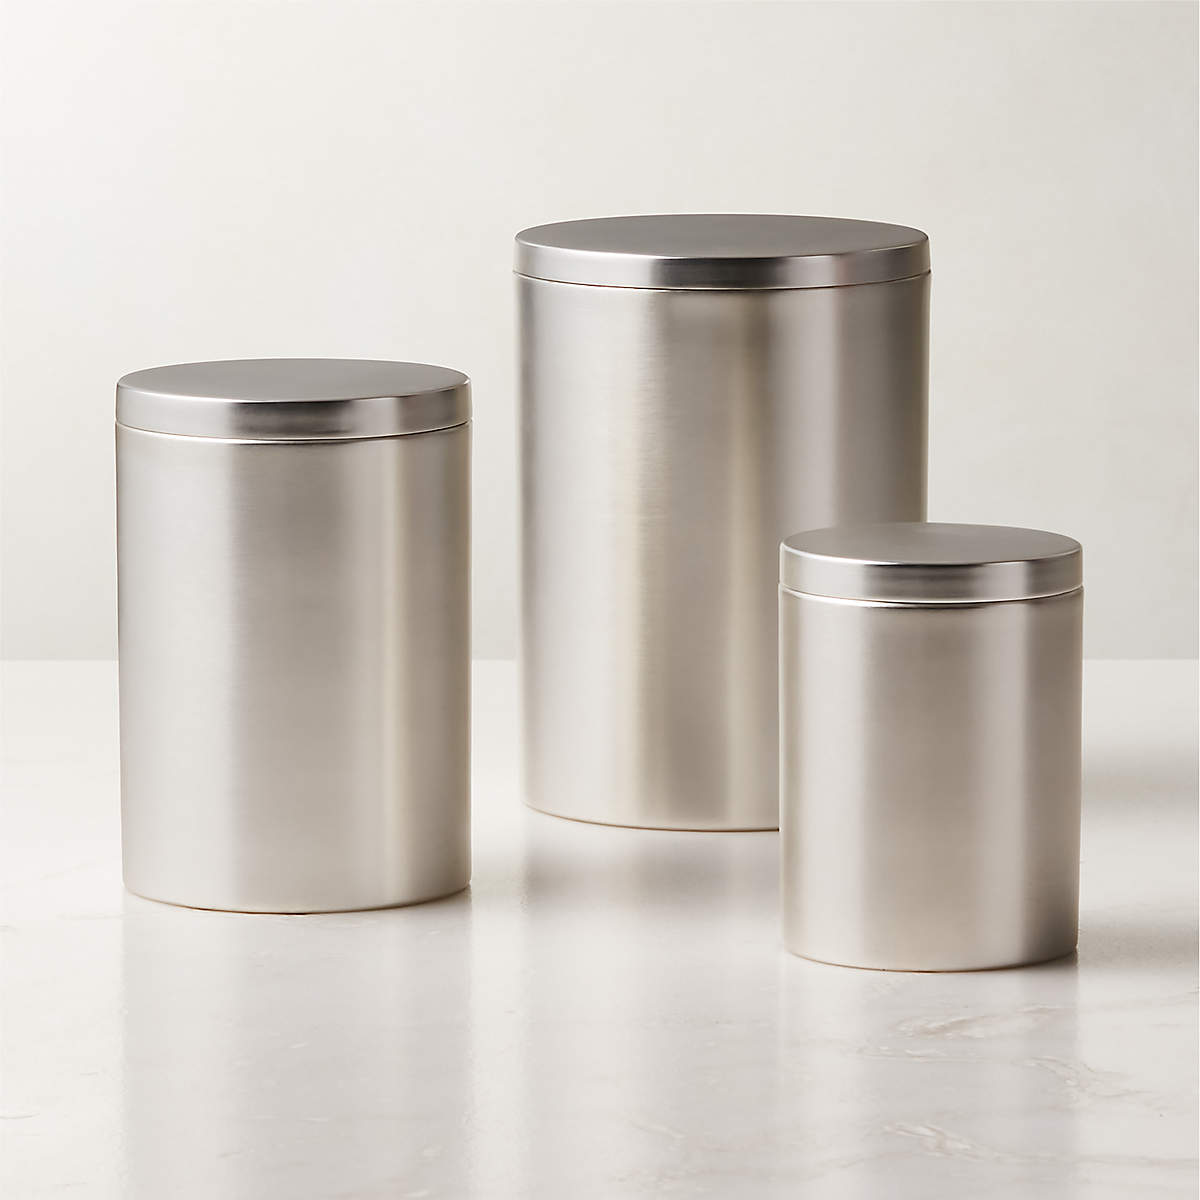 3-Piece Silver Plated Kitchen Canister Set + Reviews | CB2